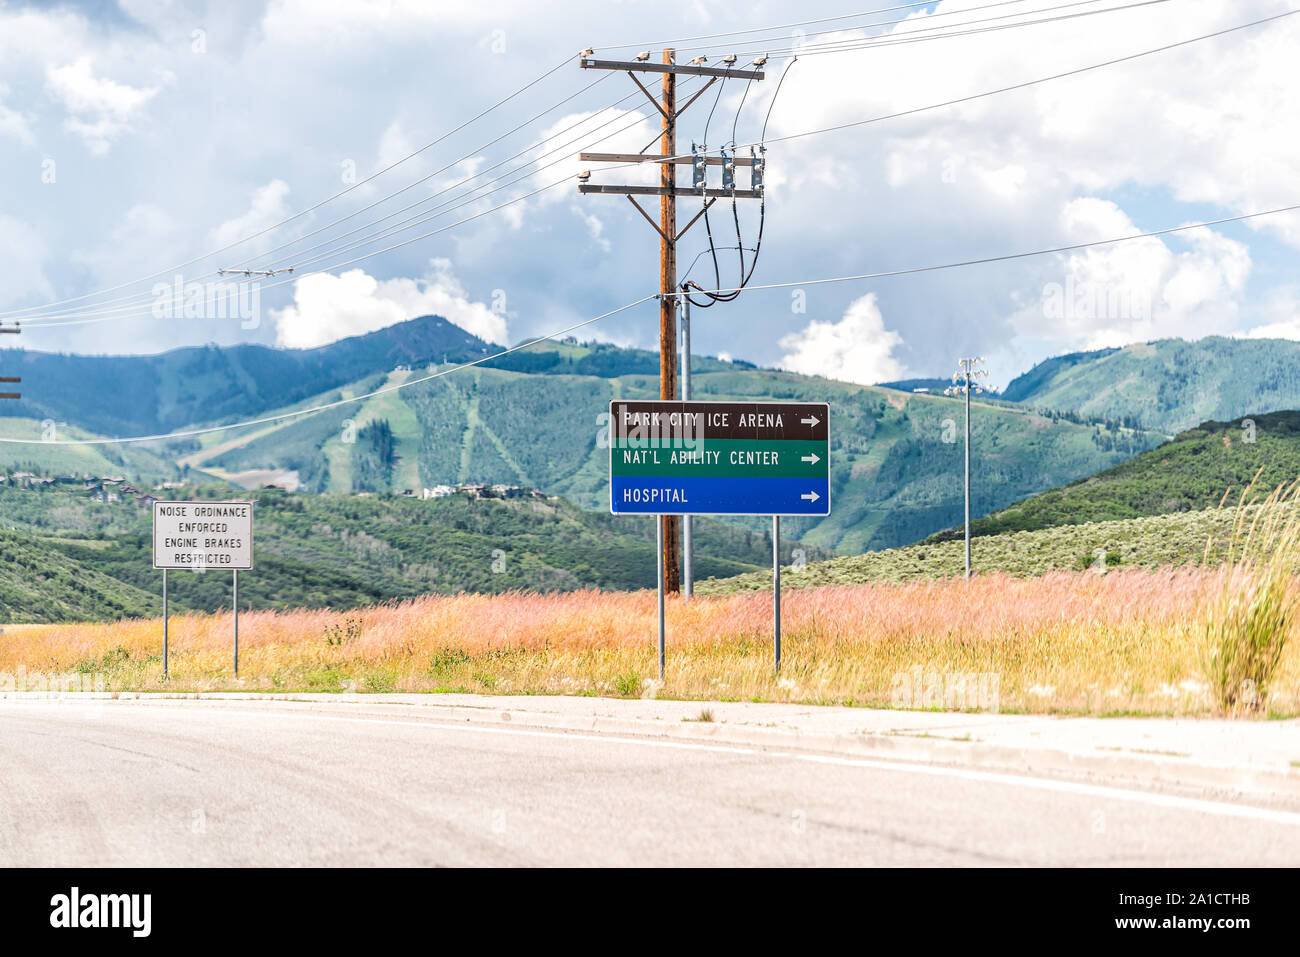 Wanship, USA - July 25, 2019: Park City area on interstate 80 highway or 189 with road signs for ice arena and mountain view Stock Photo